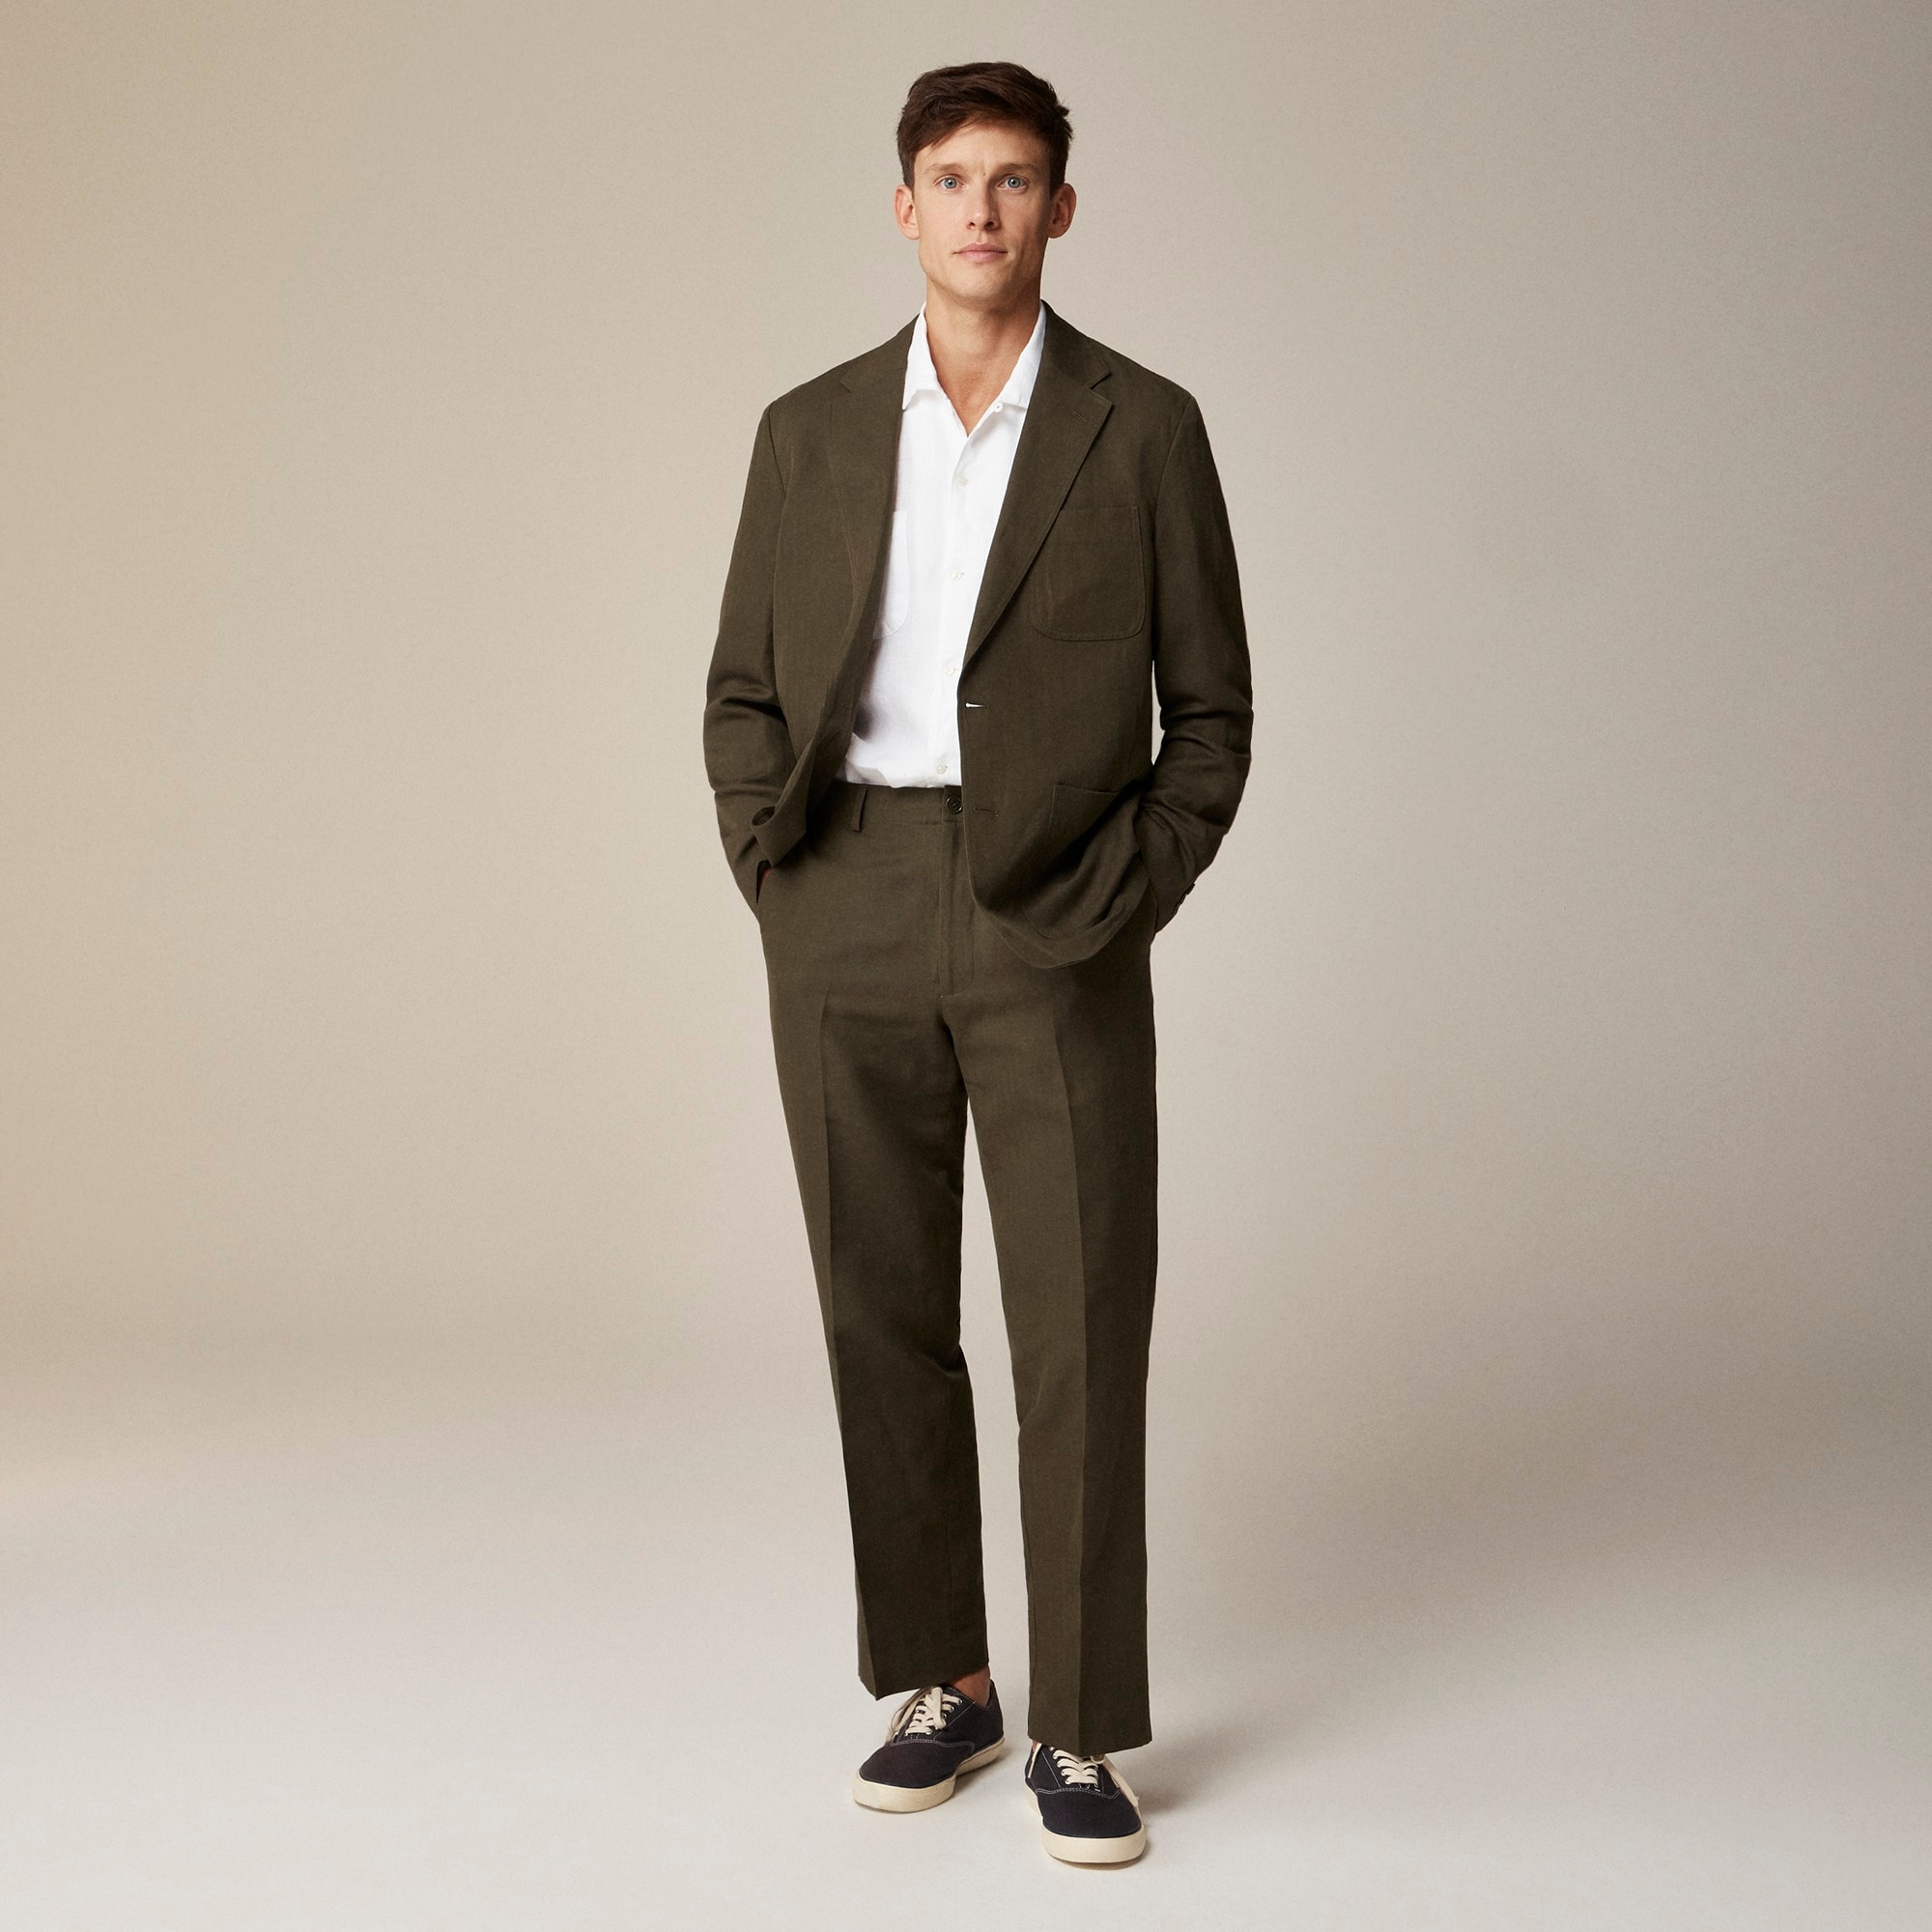  Kenmare Relaxed-fit unstructured suit jacket in cotton-linen blend herringbone